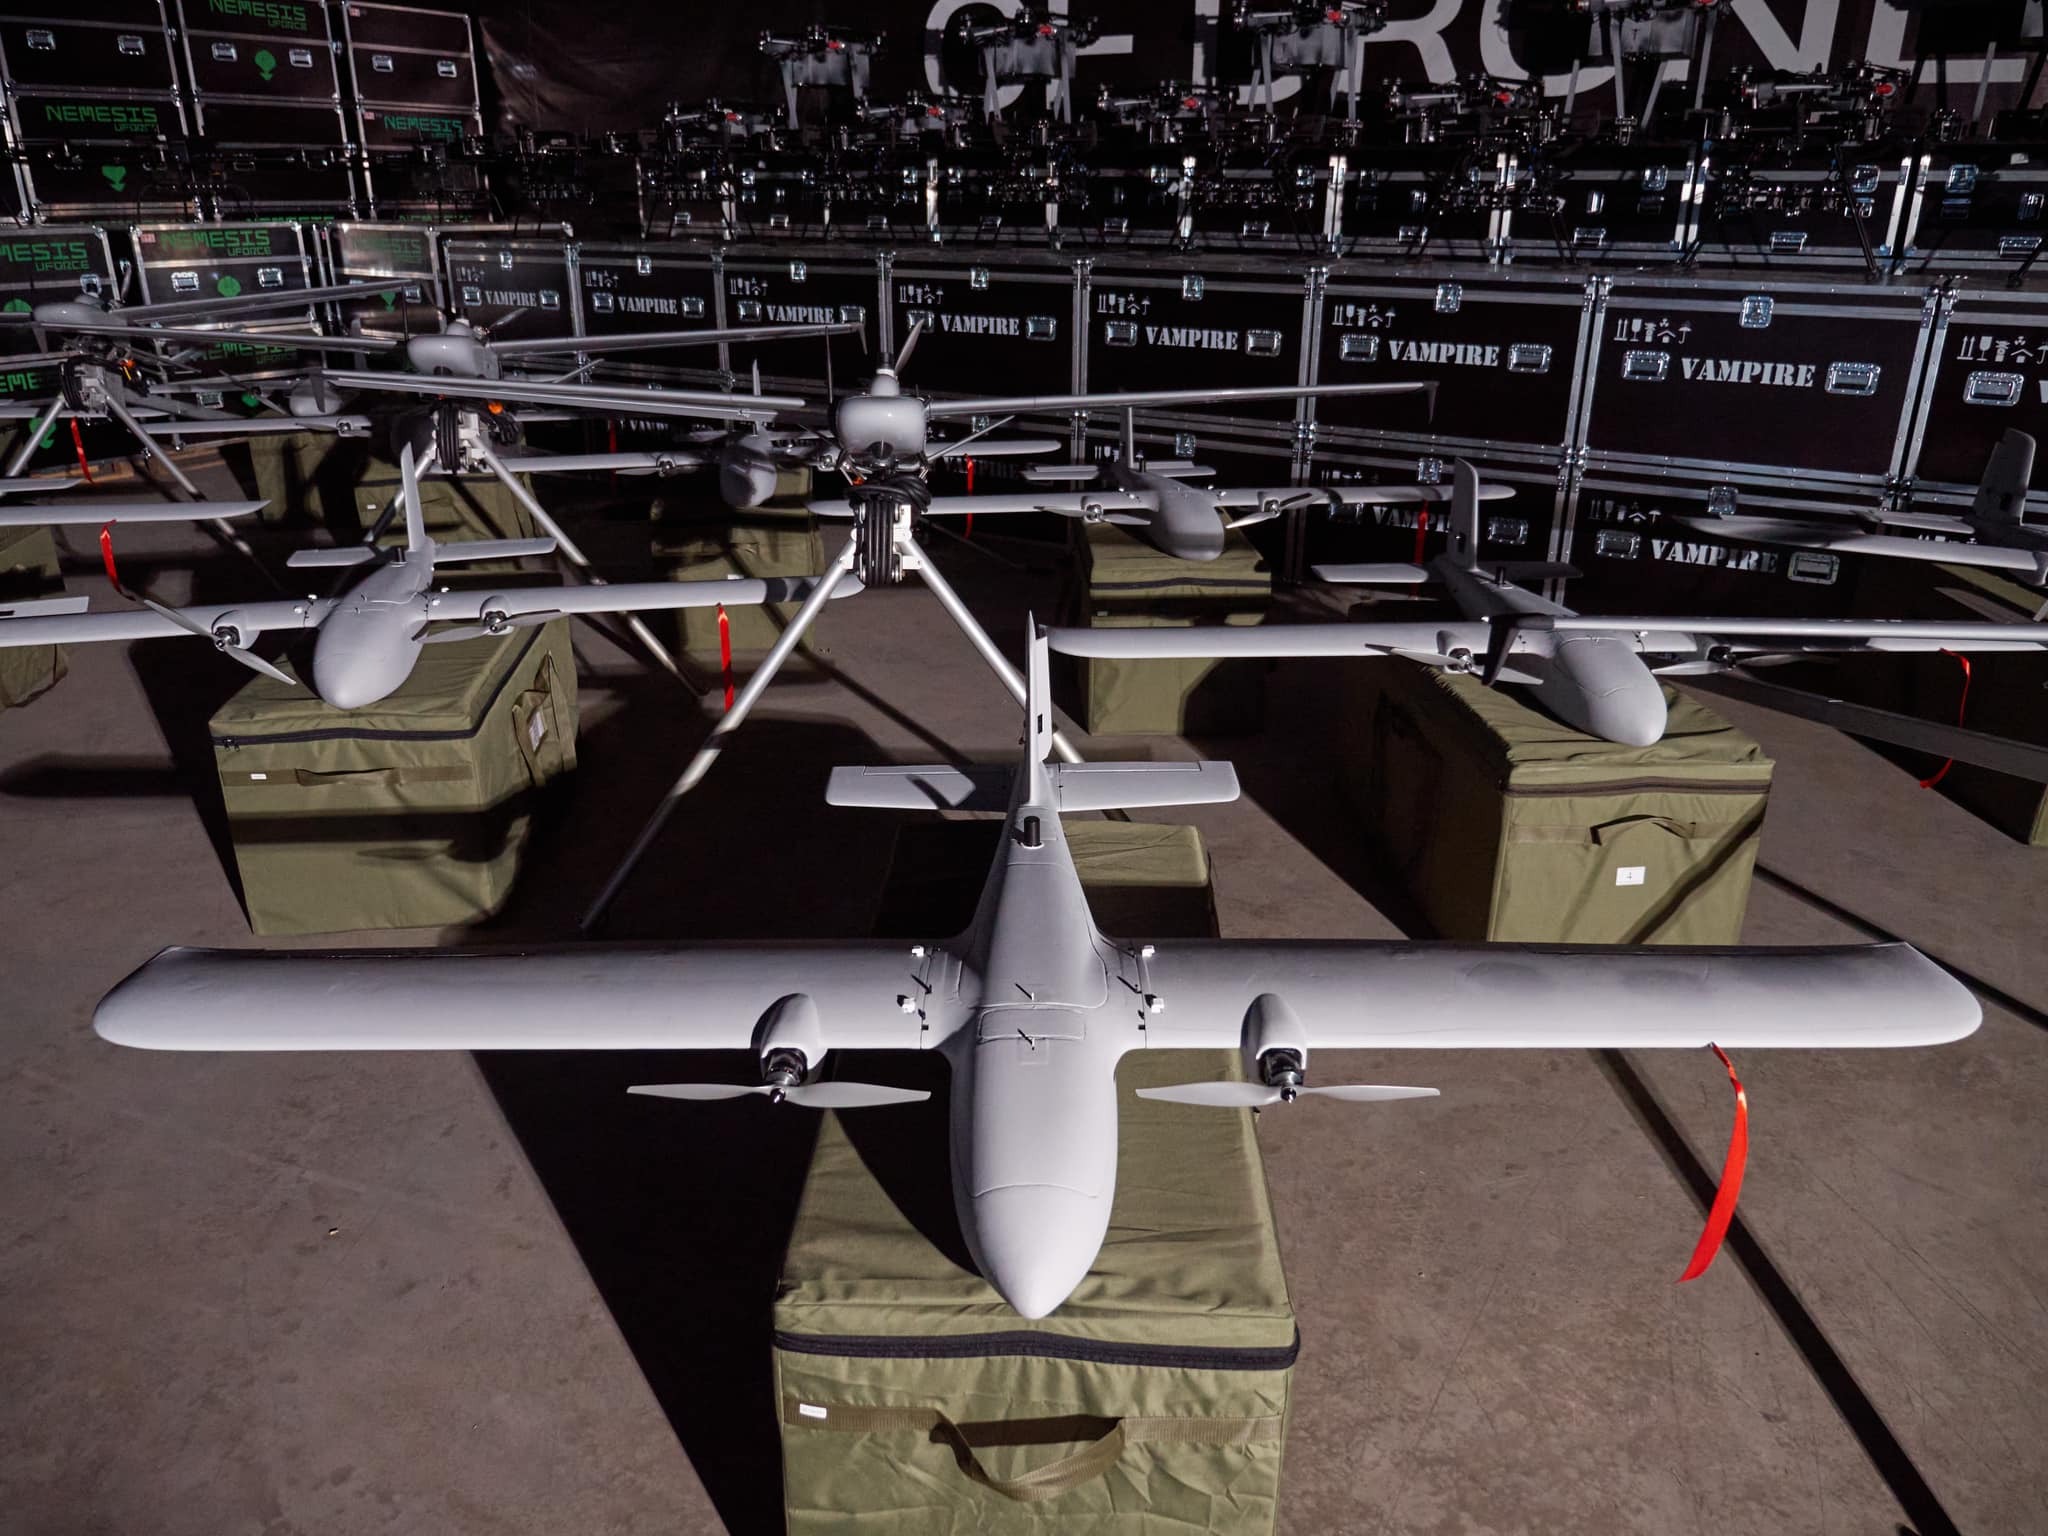 "Ukroboronprom" will deliver several hundred UAVs to the Armed Forces by the end of the year